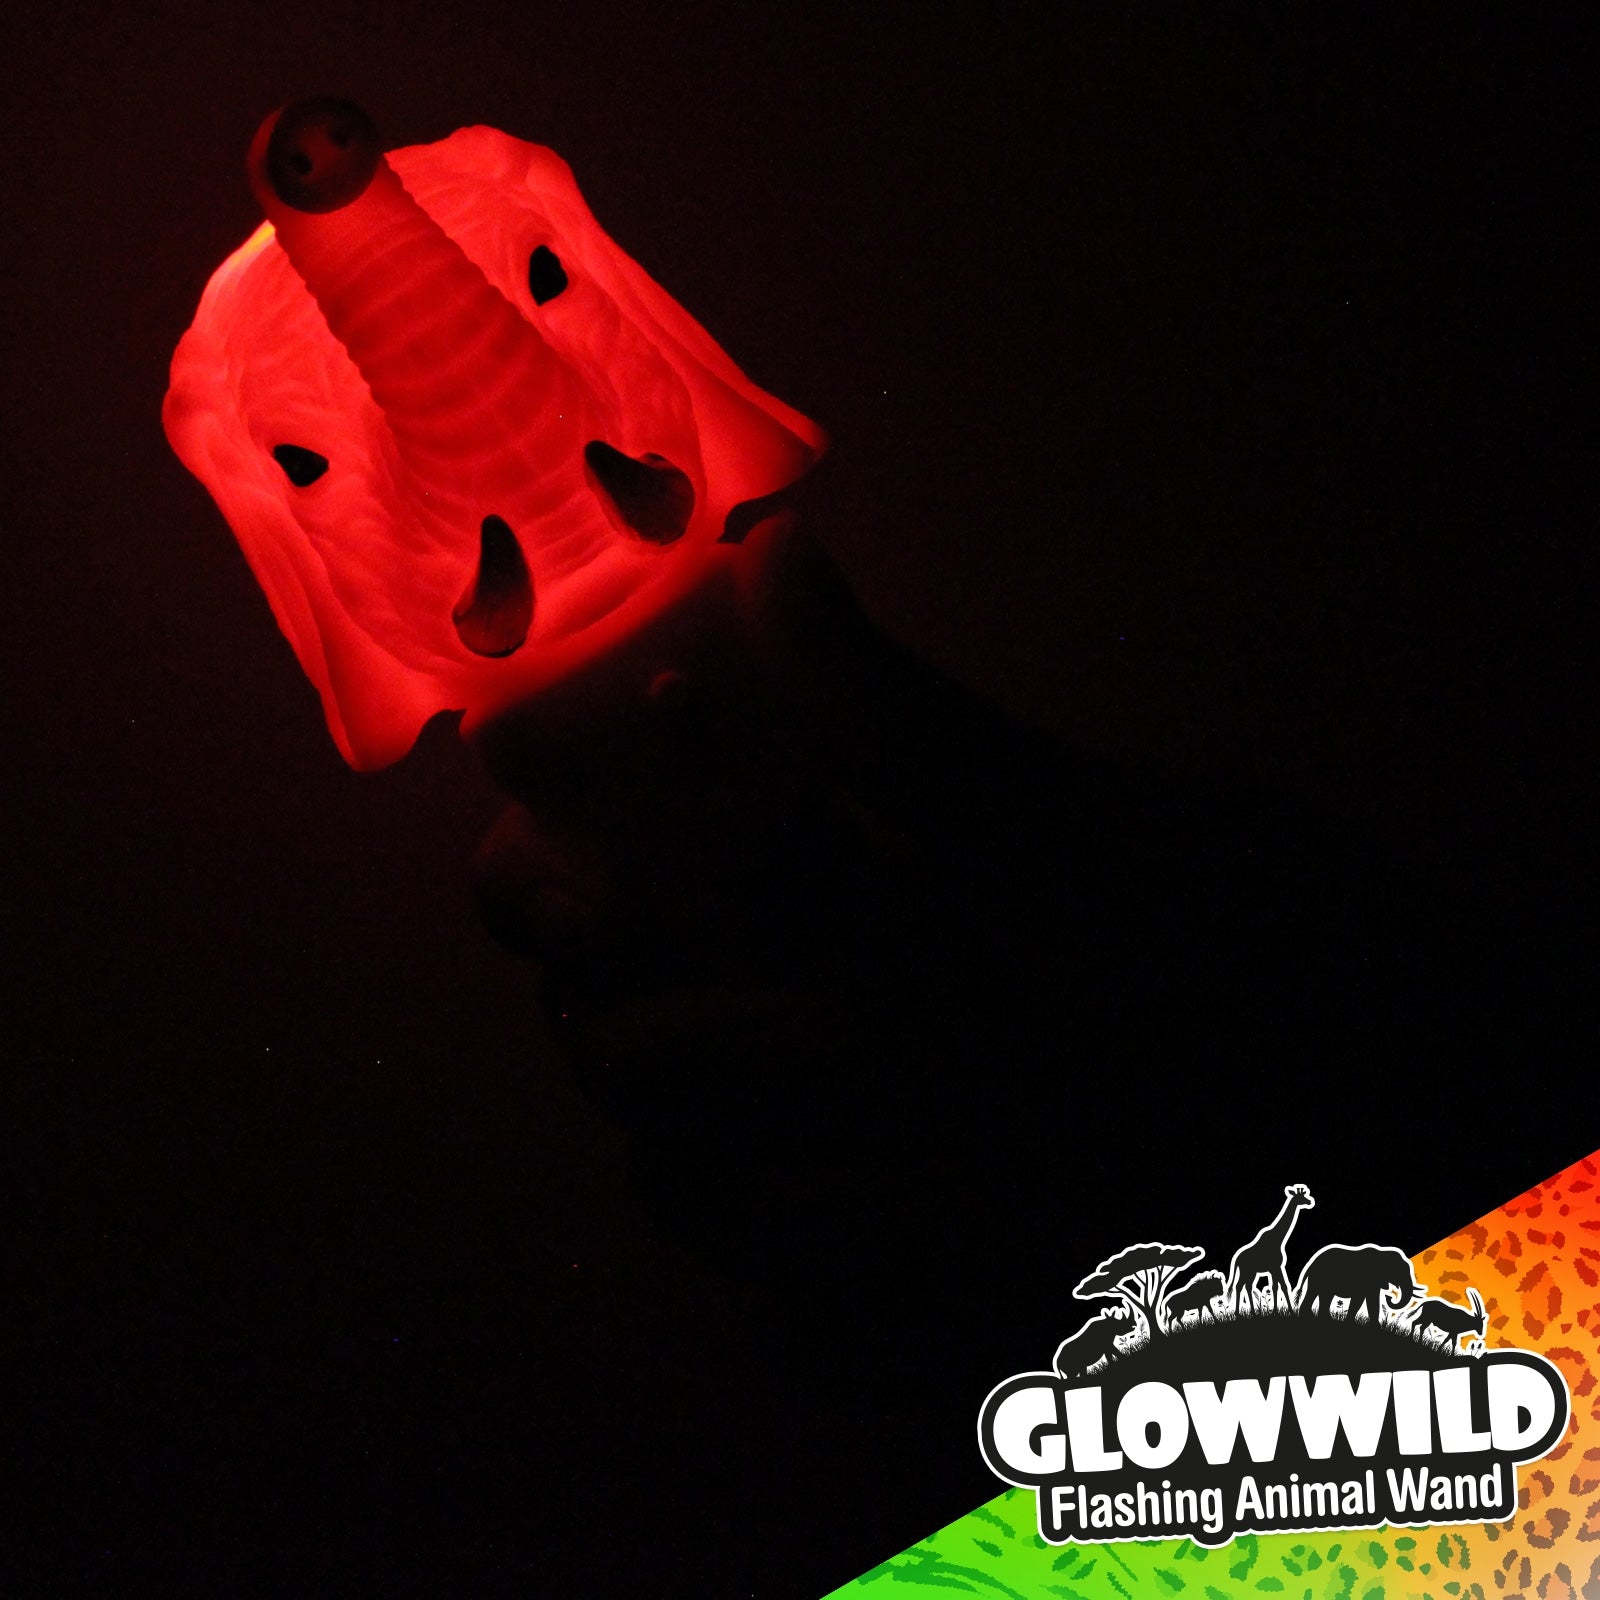 Elephant Mini Light Up Animal Wand 7", At 7" long this flashing elephant wand is just the right size for small hands and packed with multi coloured LEDs it lights up in a dazzling light show! With a simple on/off function, this Glow Wild mini elephant wand shines through a mesmerising colour change light show shining through the head and trunk of the white elephant wand. With batteries included and ready to go, animal lovers will love this sweet elephant that's ideal for animal themed parties and events. El